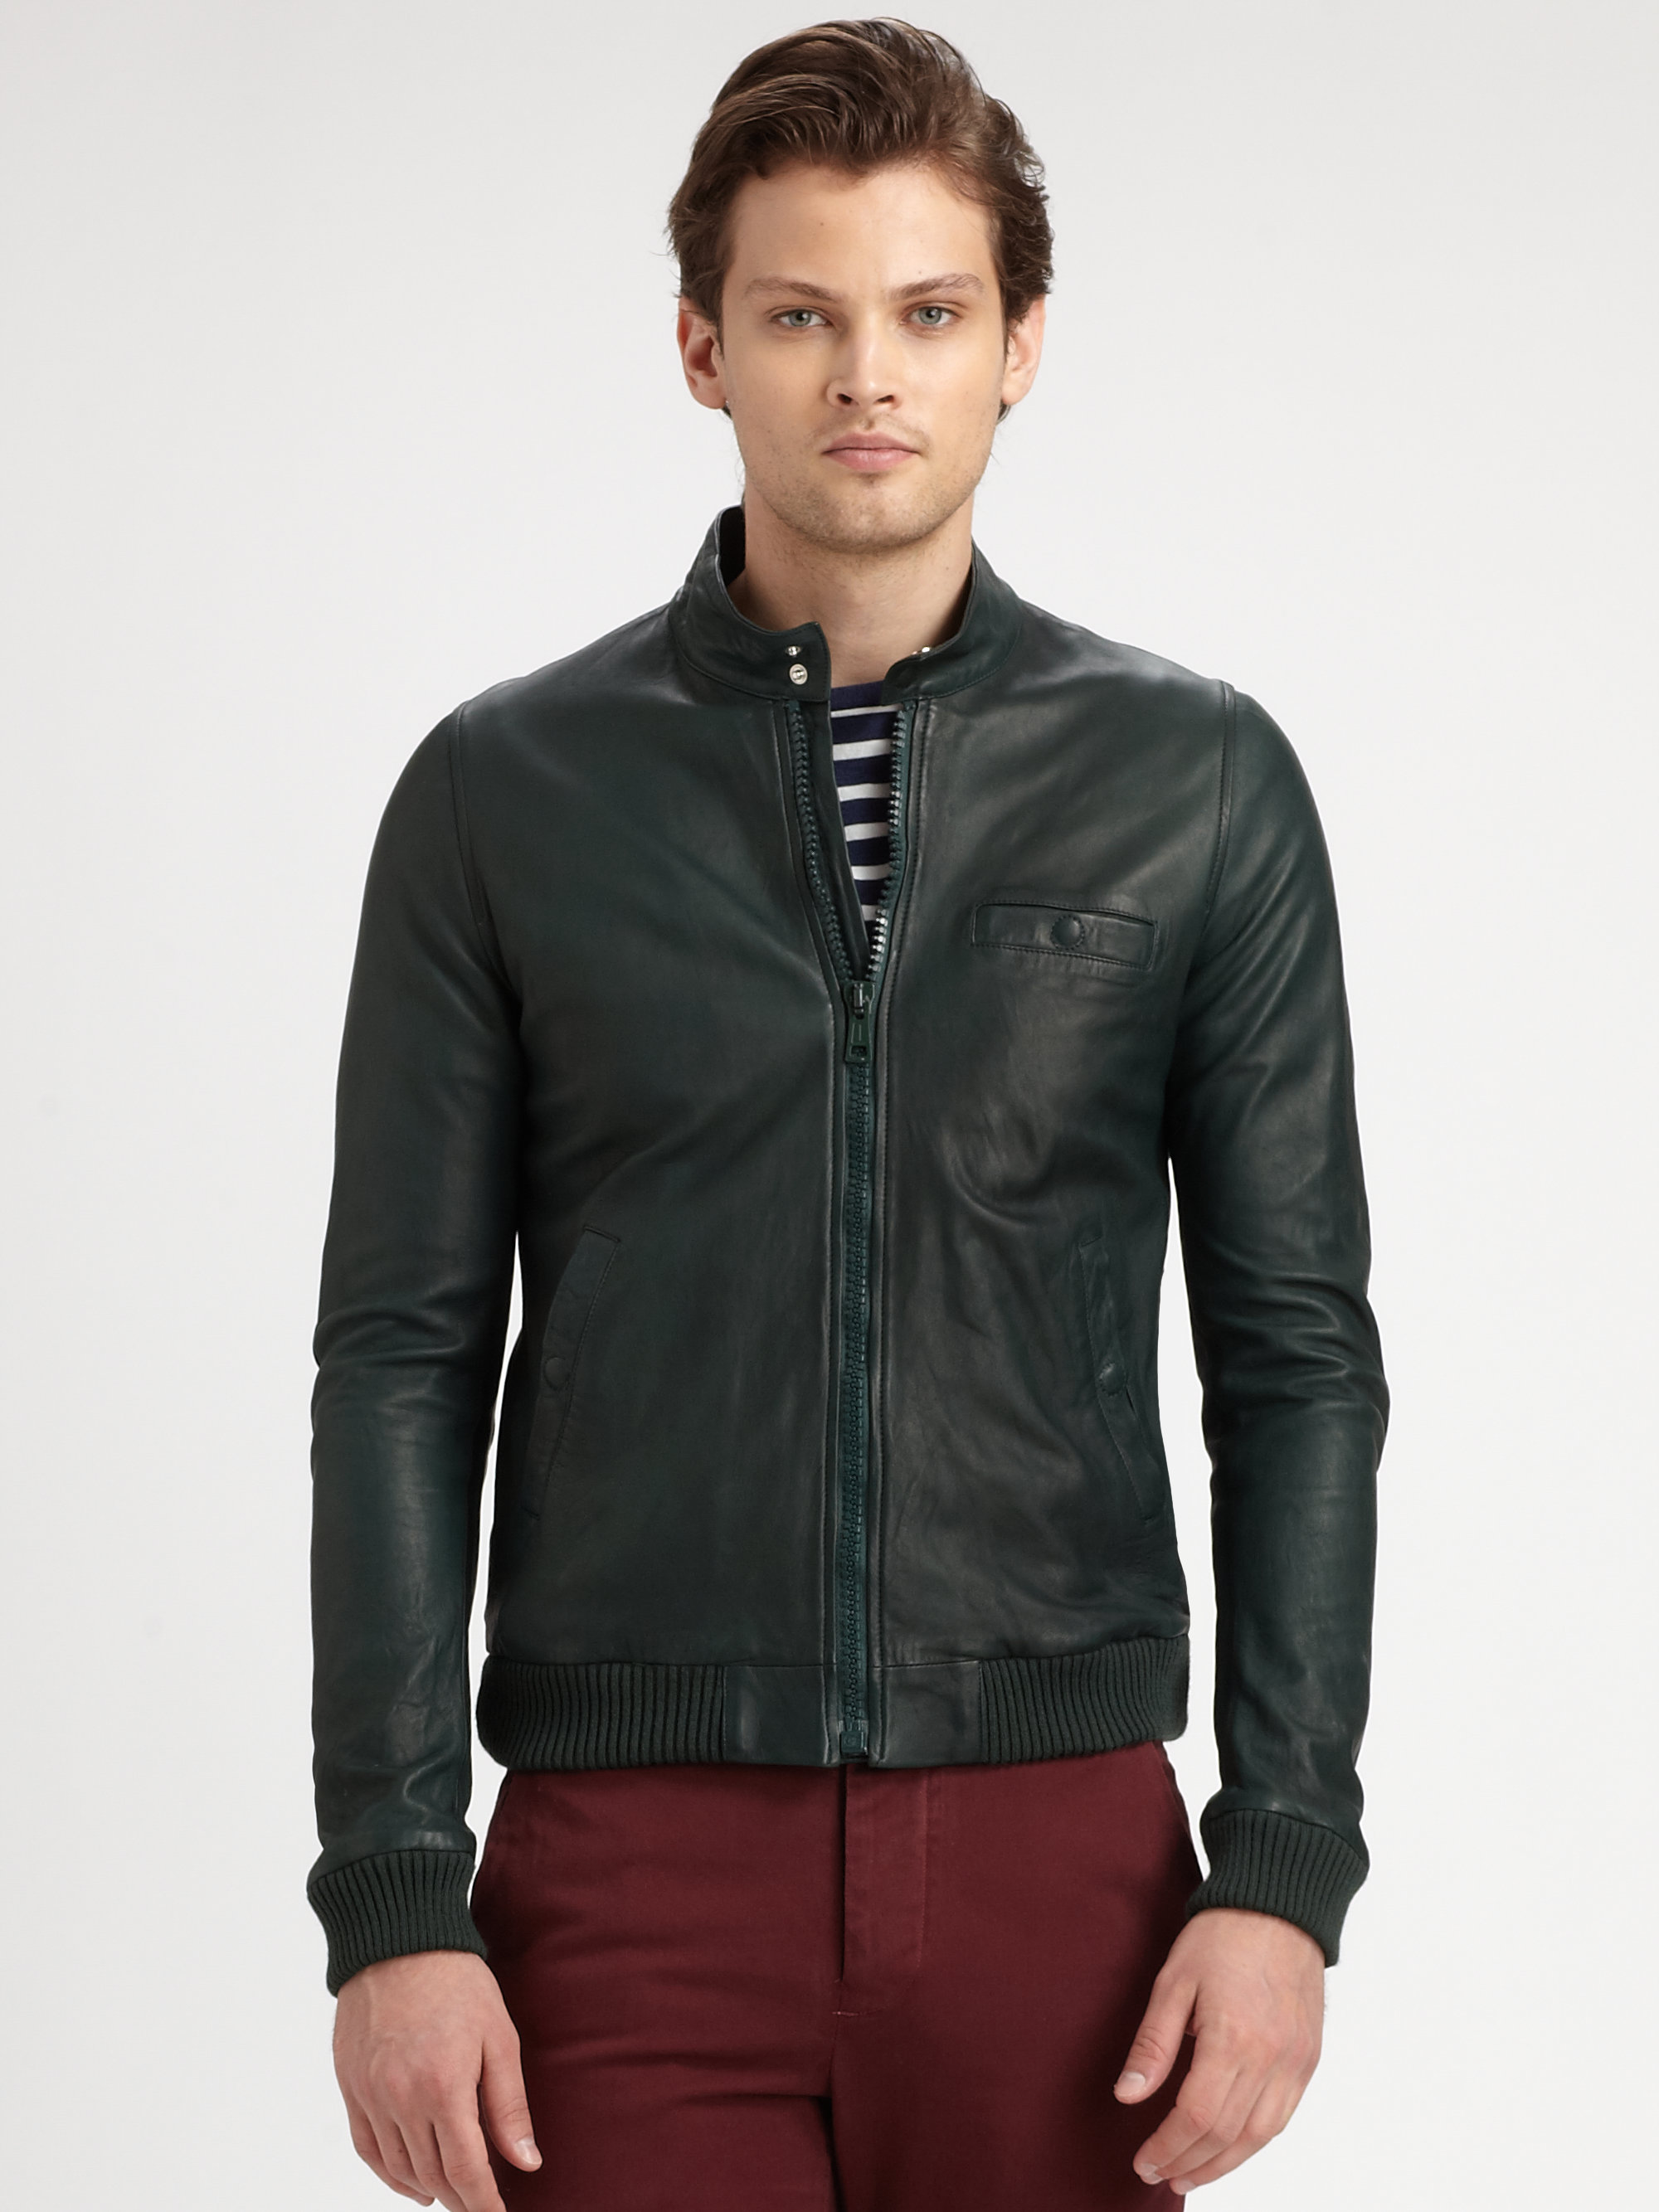 Lyst - Band Of Outsiders Leather Harrington Jacket in ...